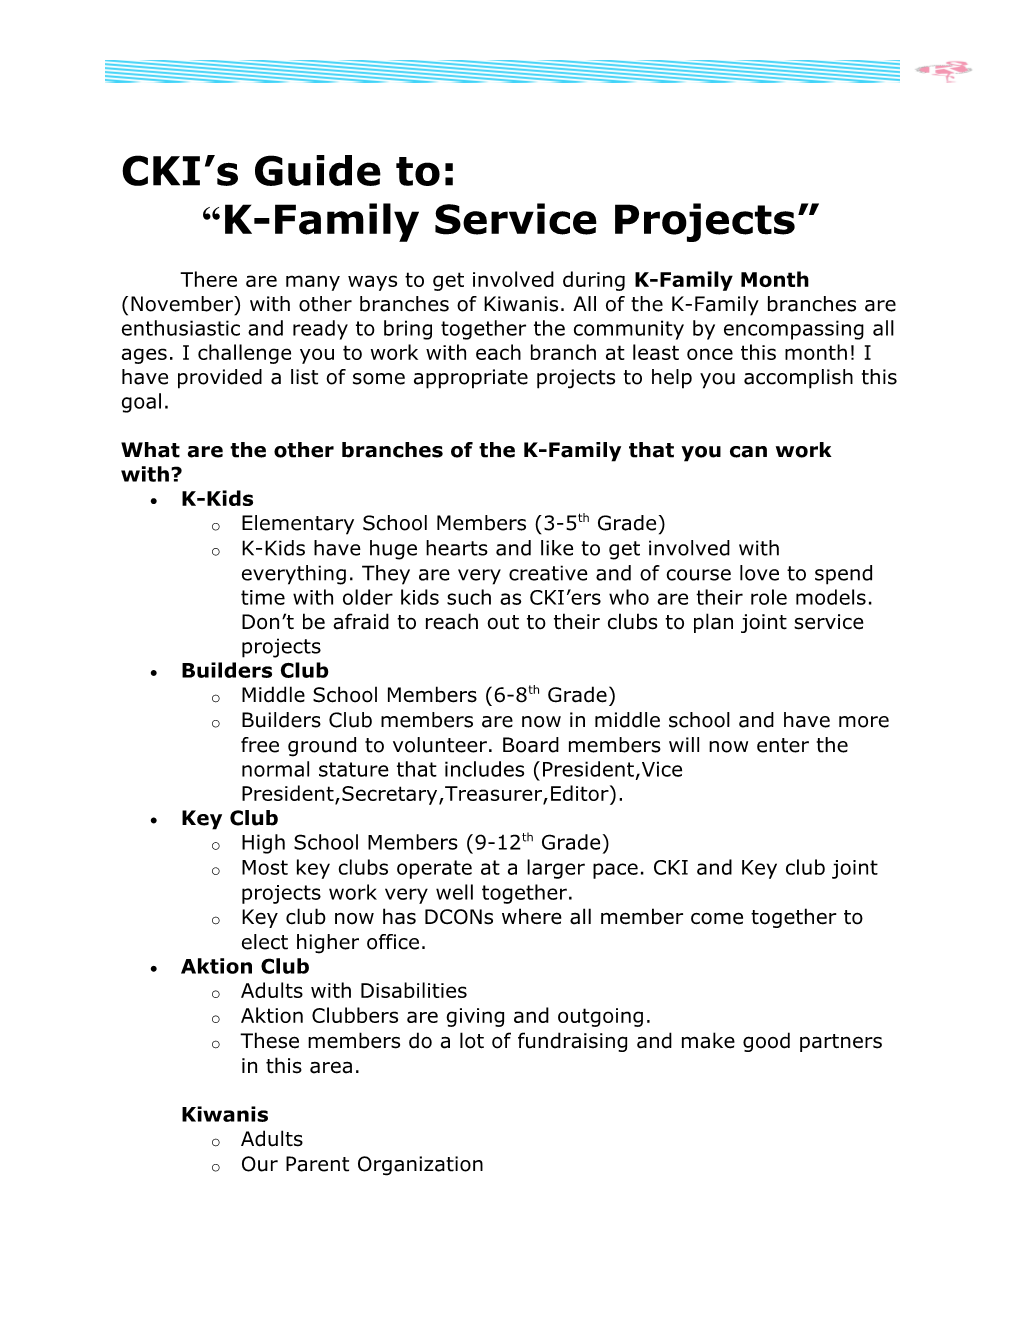 K-Family Service Projects